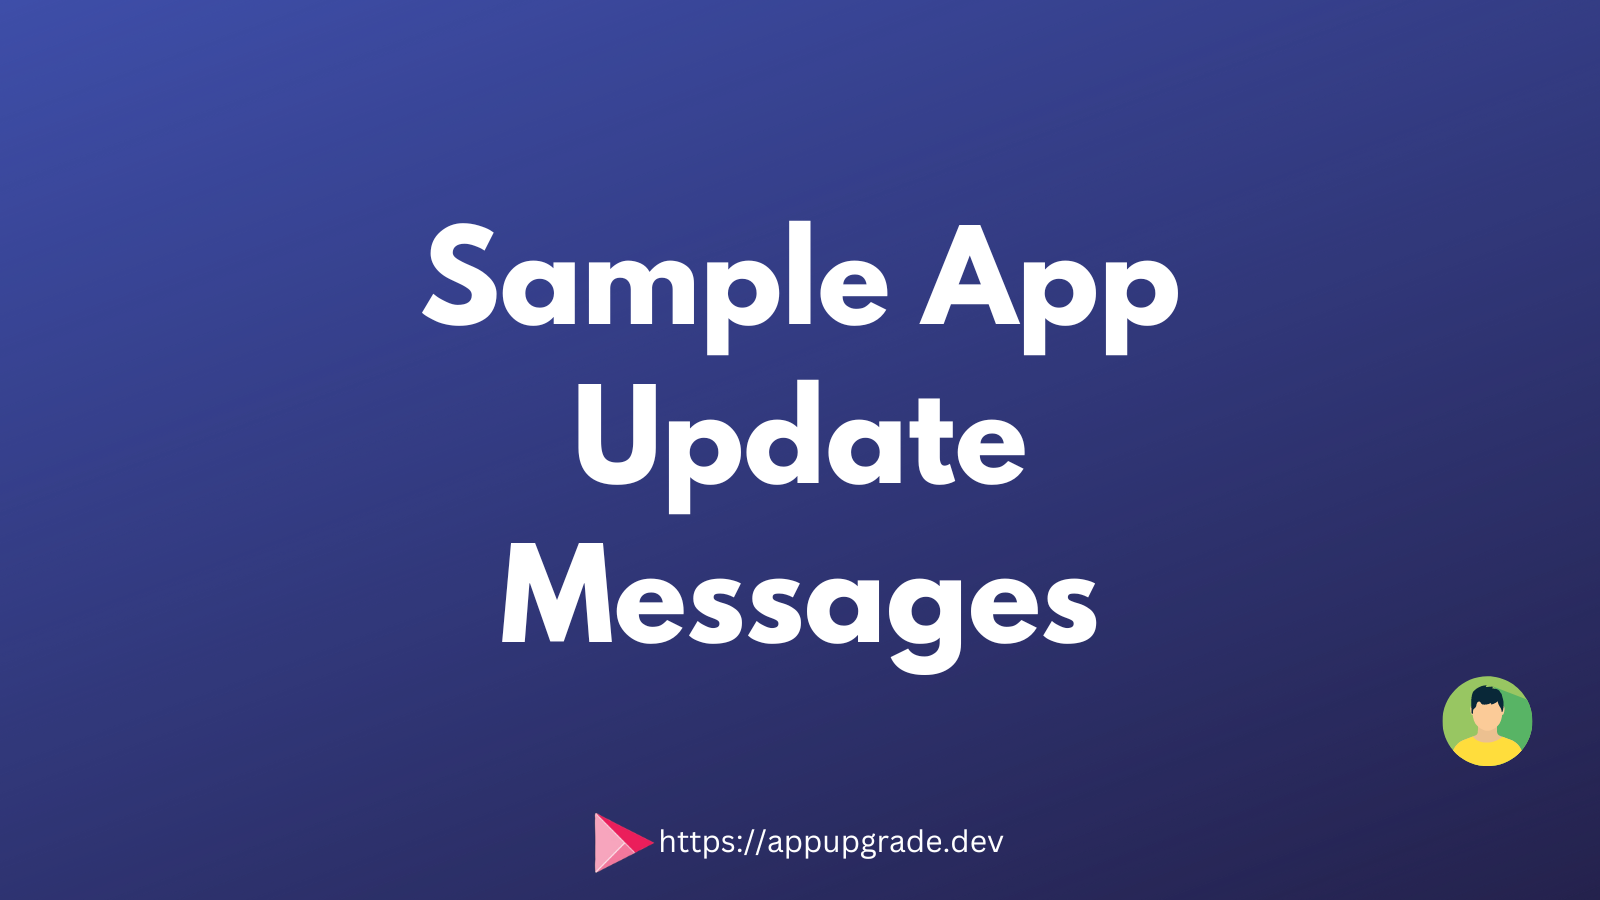 Sample app update messages for you to getting started.